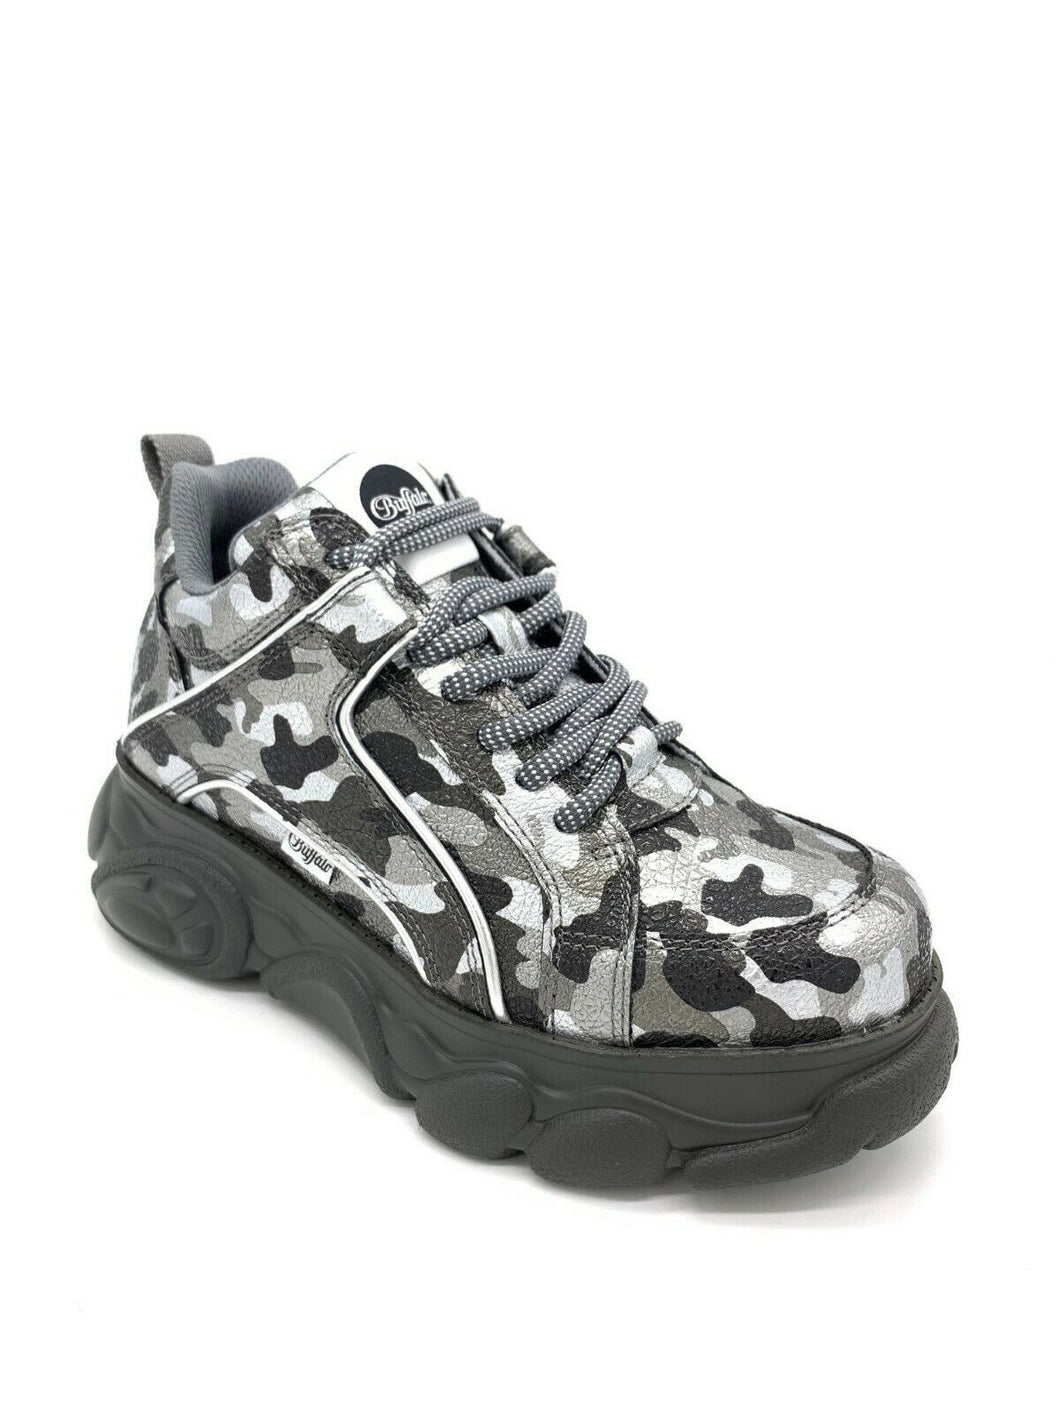 Buffalo Boots Shoes Sneaker Platform Shoes 90s Camouflage Military Design